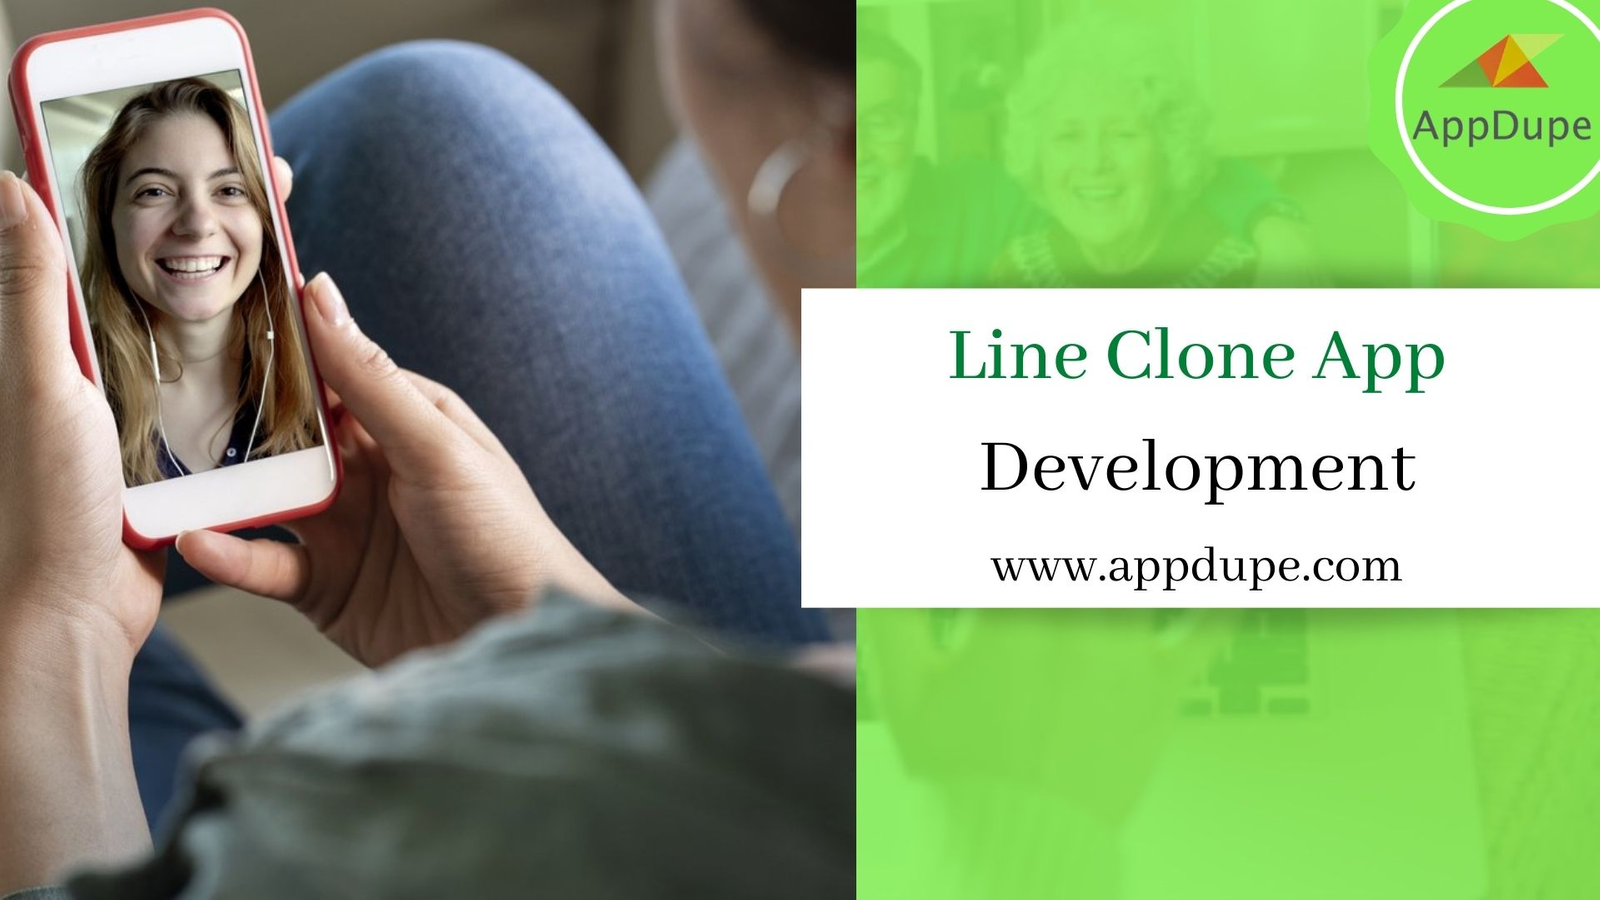 Features worth considering in a Line Clone App Development